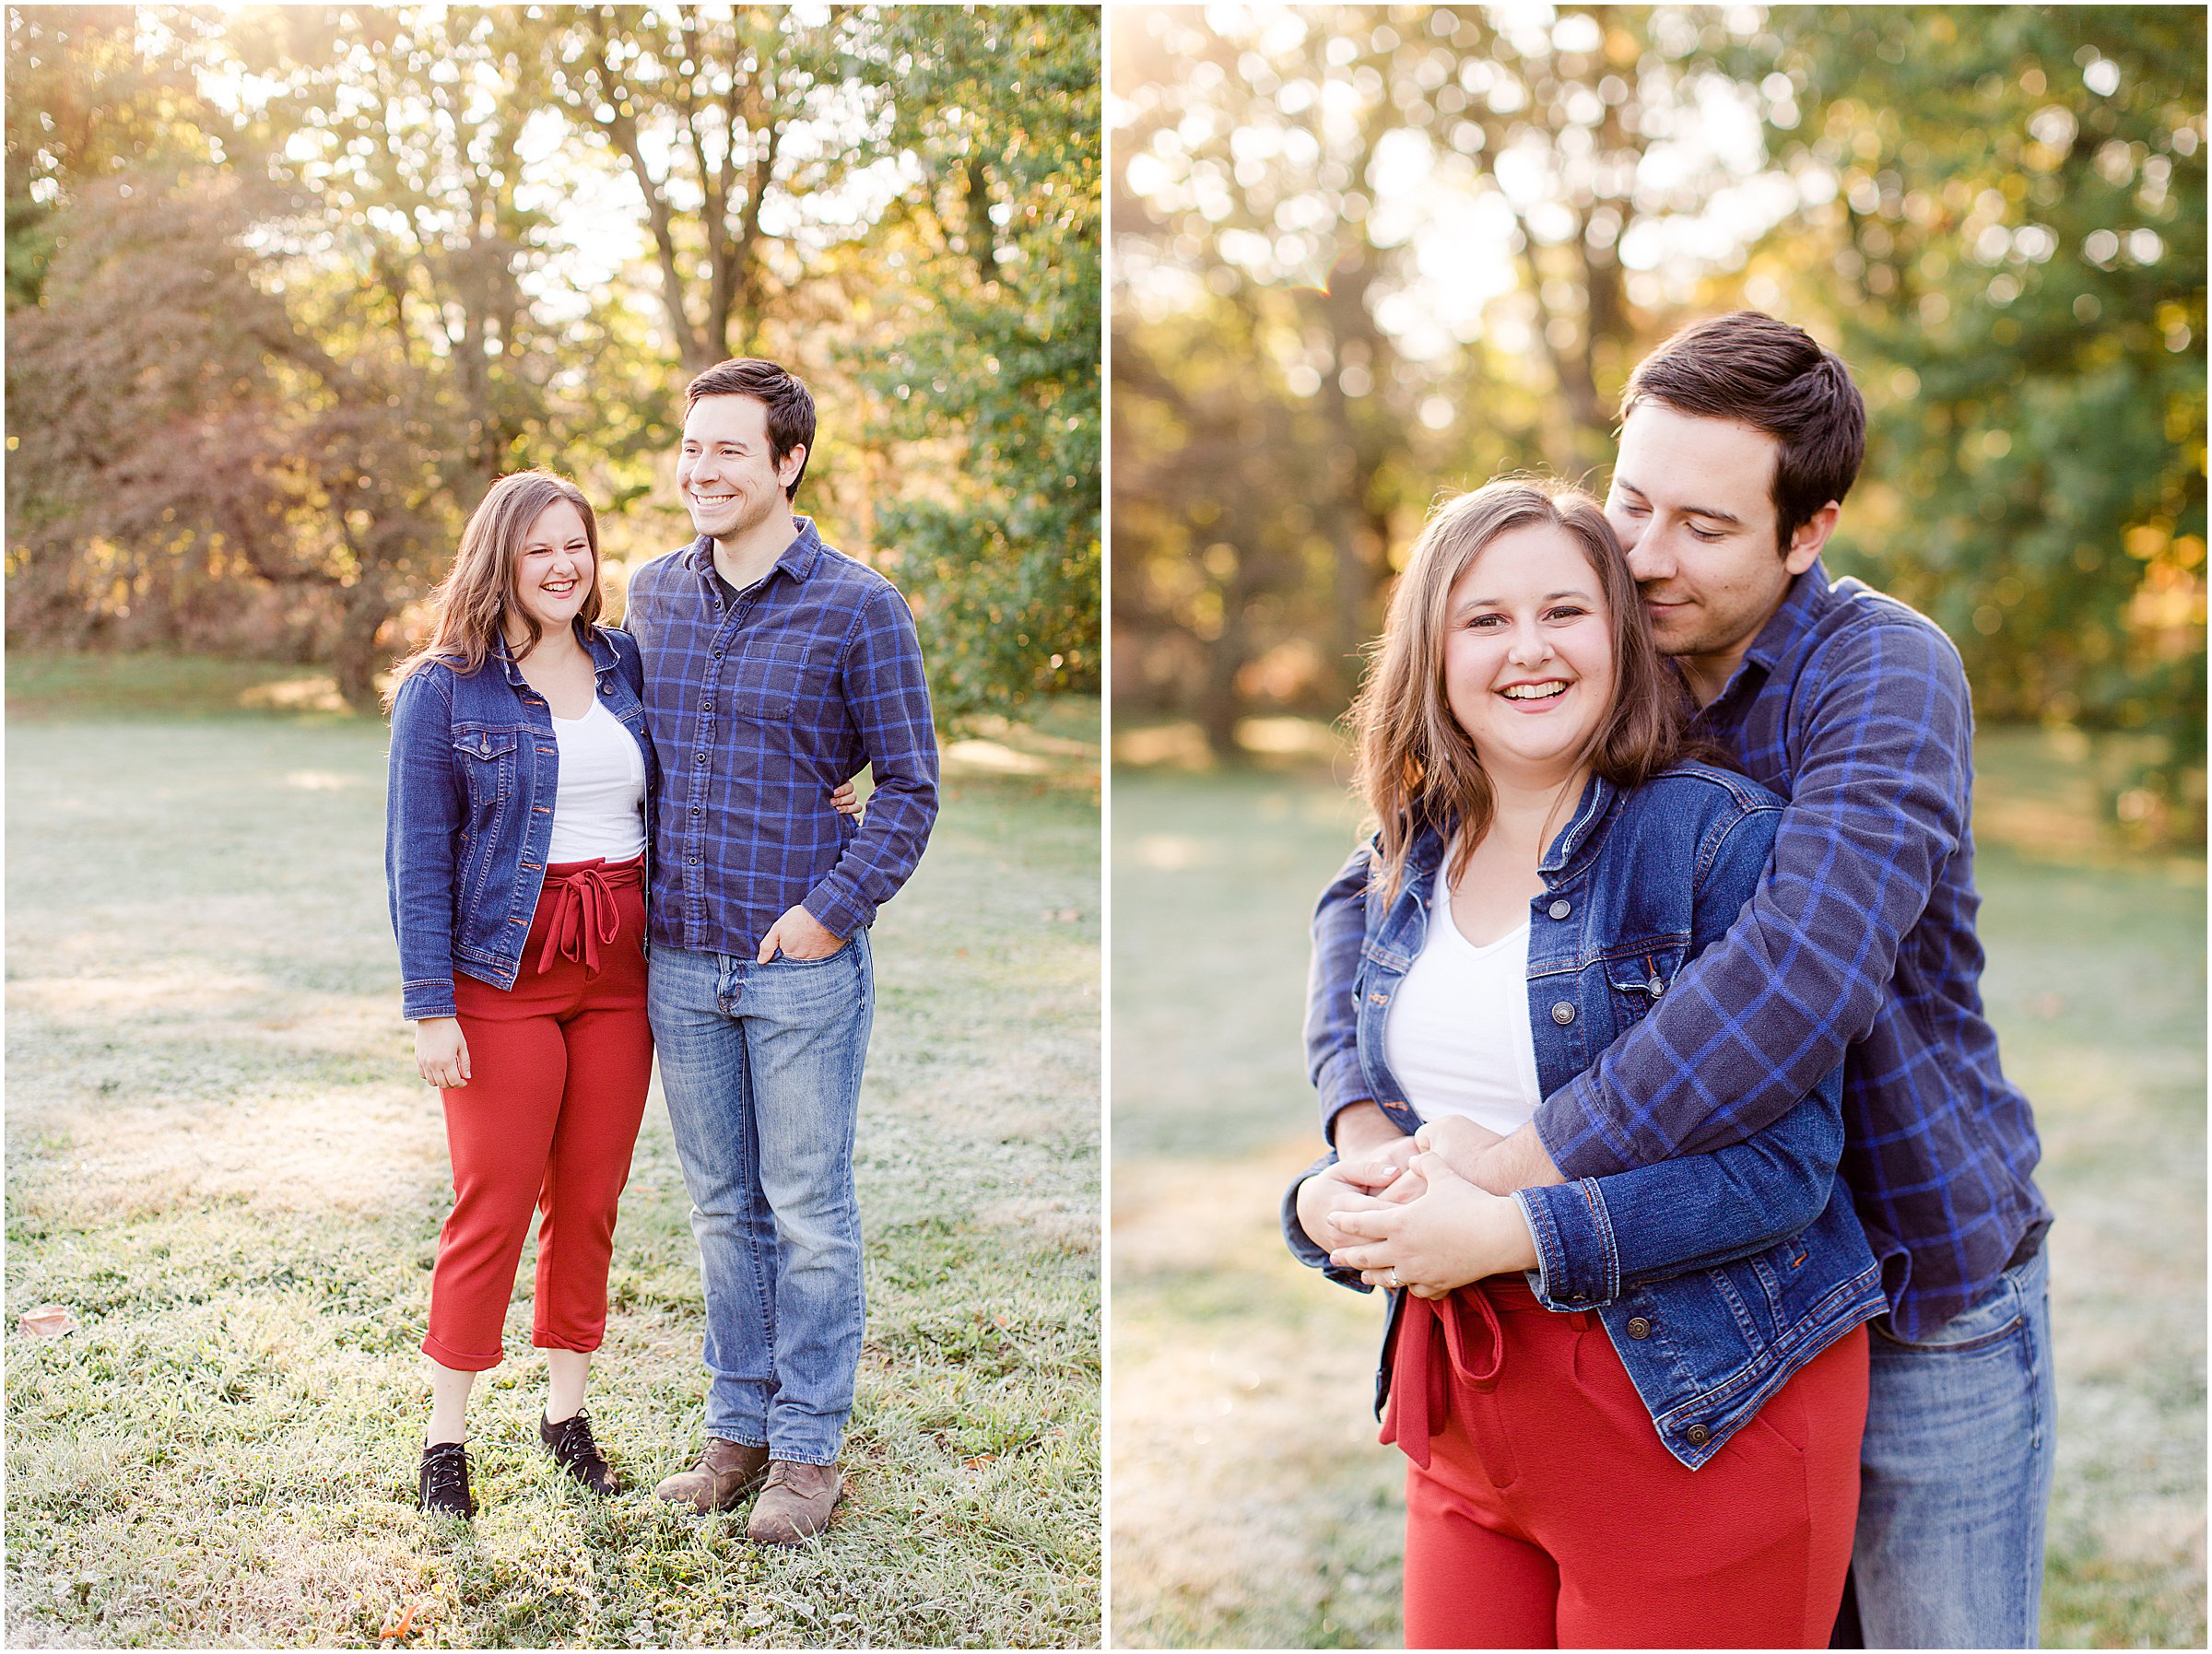 Holliday Park Engagement Session by Sami Renee_0001.jpg